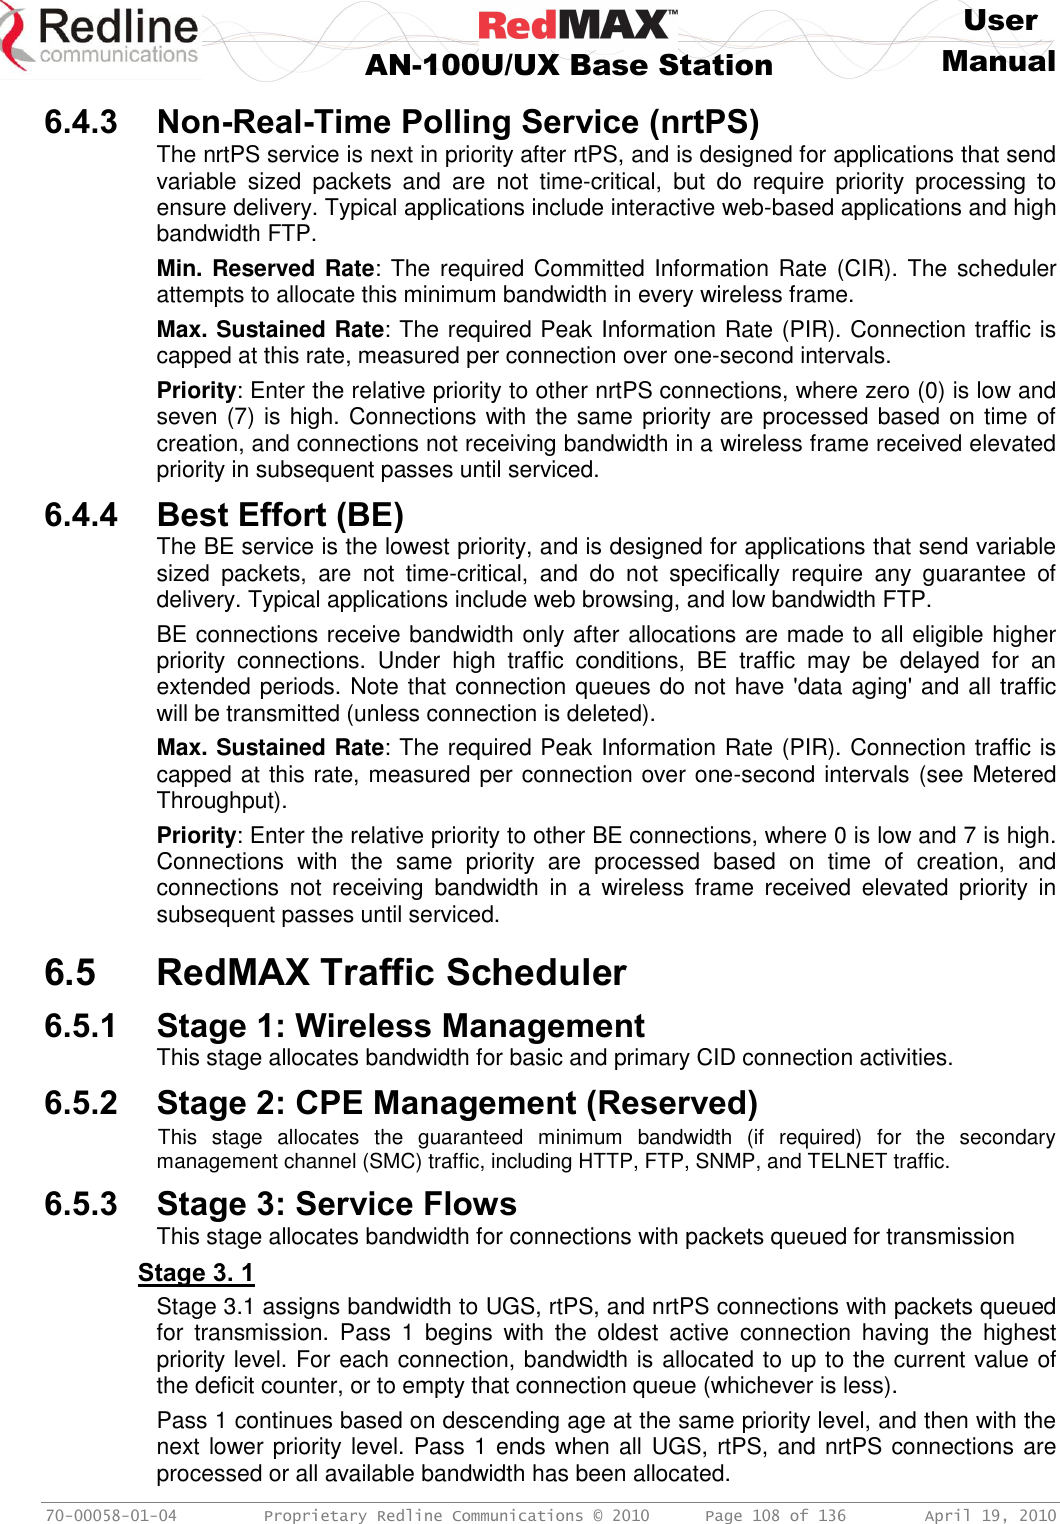     User  AN-100U/UX Base Station Manual   70-00058-01-04  Proprietary Redline Communications © 2010   Page 108 of 136  April 19, 2010 6.4.3 Non-Real-Time Polling Service (nrtPS) The nrtPS service is next in priority after rtPS, and is designed for applications that send variable  sized  packets  and  are  not  time-critical,  but  do  require  priority  processing  to ensure delivery. Typical applications include interactive web-based applications and high bandwidth FTP. Min. Reserved Rate: The required Committed Information Rate (CIR). The scheduler attempts to allocate this minimum bandwidth in every wireless frame. Max. Sustained Rate: The required Peak Information Rate (PIR). Connection traffic is capped at this rate, measured per connection over one-second intervals. Priority: Enter the relative priority to other nrtPS connections, where zero (0) is low and seven (7) is high. Connections with the same priority are processed based on time of creation, and connections not receiving bandwidth in a wireless frame received elevated priority in subsequent passes until serviced. 6.4.4 Best Effort (BE) The BE service is the lowest priority, and is designed for applications that send variable sized  packets,  are  not  time-critical,  and  do  not  specifically  require  any  guarantee  of delivery. Typical applications include web browsing, and low bandwidth FTP.  BE connections receive bandwidth only after allocations are made to all eligible higher priority  connections.  Under  high  traffic  conditions,  BE  traffic  may  be  delayed  for  an extended periods. Note that connection queues do not have &apos;data aging&apos; and all traffic will be transmitted (unless connection is deleted). Max. Sustained Rate: The required Peak Information Rate (PIR). Connection traffic is capped at this rate, measured per connection over one-second intervals (see Metered Throughput). Priority: Enter the relative priority to other BE connections, where 0 is low and 7 is high. Connections  with  the  same  priority  are  processed  based  on  time  of  creation,  and connections  not  receiving  bandwidth  in  a  wireless  frame  received  elevated  priority  in subsequent passes until serviced.  6.5 RedMAX Traffic Scheduler 6.5.1 Stage 1: Wireless Management This stage allocates bandwidth for basic and primary CID connection activities. 6.5.2 Stage 2: CPE Management (Reserved) This  stage  allocates  the  guaranteed  minimum  bandwidth  (if  required)  for  the  secondary management channel (SMC) traffic, including HTTP, FTP, SNMP, and TELNET traffic. 6.5.3 Stage 3: Service Flows This stage allocates bandwidth for connections with packets queued for transmission Stage 3. 1 Stage 3.1 assigns bandwidth to UGS, rtPS, and nrtPS connections with packets queued for  transmission.  Pass  1  begins  with  the  oldest  active  connection  having  the  highest priority level. For each connection, bandwidth is allocated to up to the current value of the deficit counter, or to empty that connection queue (whichever is less). Pass 1 continues based on descending age at the same priority level, and then with the next lower priority level. Pass 1 ends when all UGS, rtPS, and nrtPS connections are processed or all available bandwidth has been allocated. 